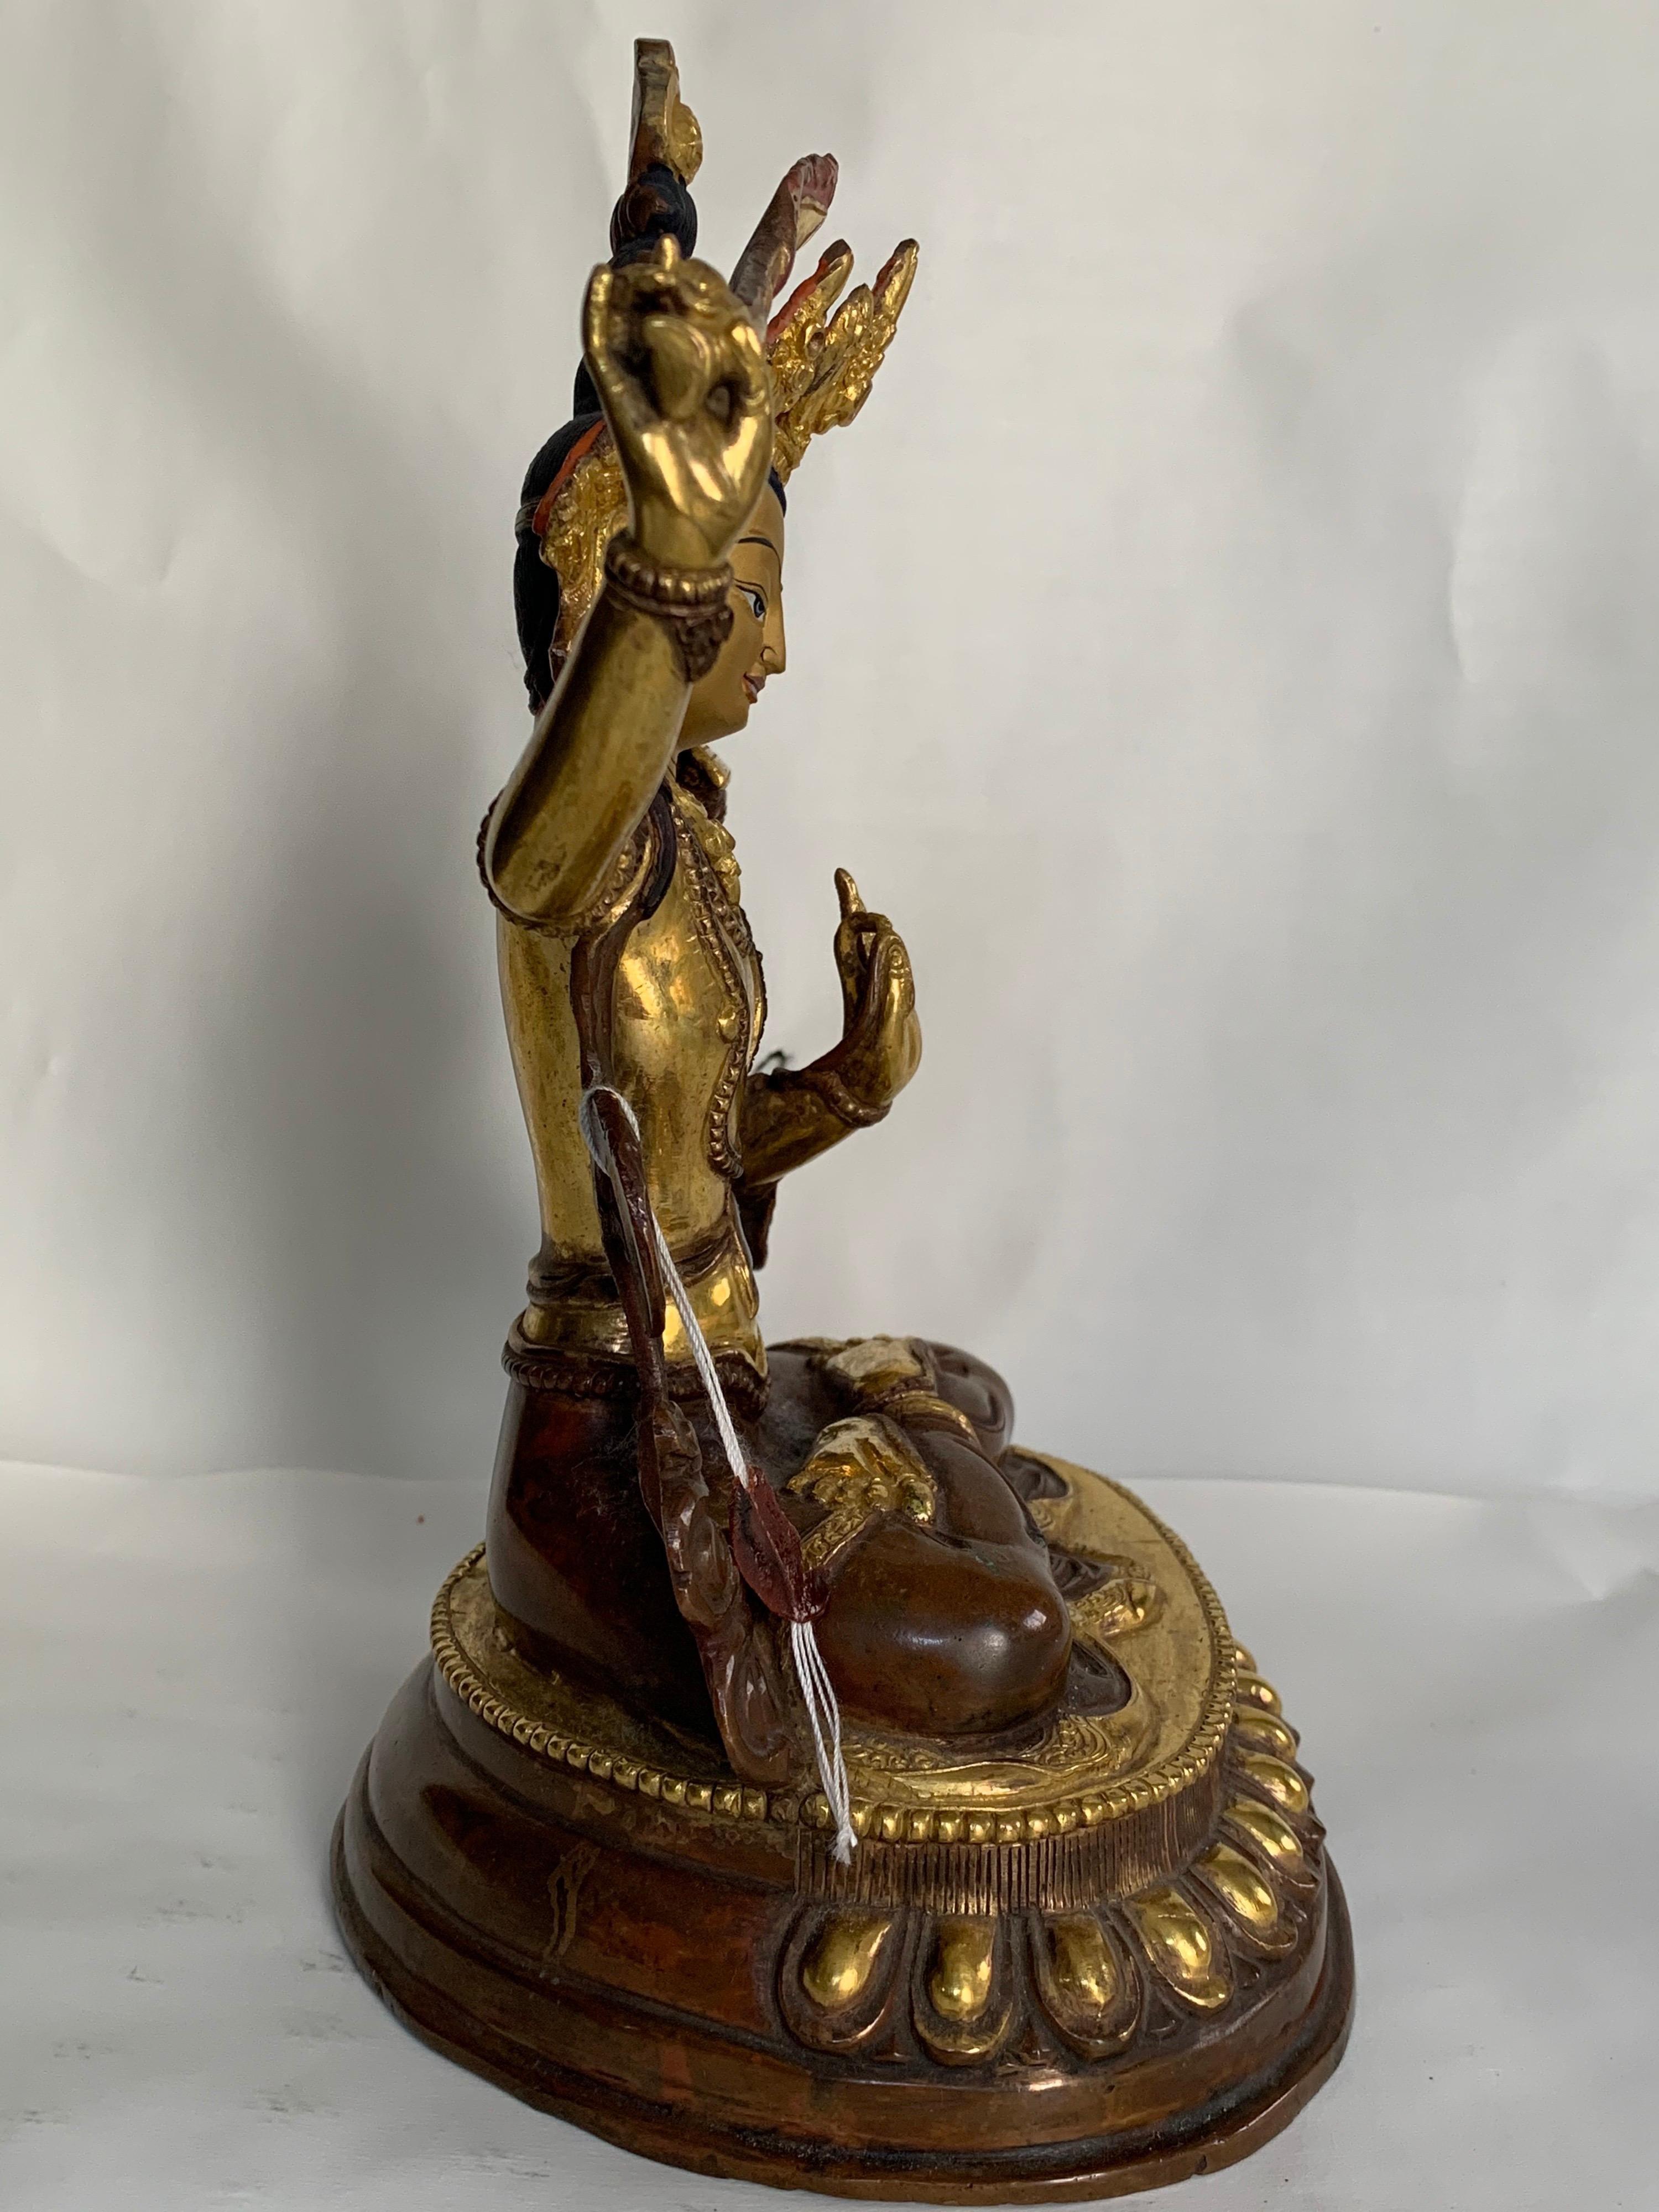 Manjushree Statue 9 Inch with 24K Gold Handcrafted by Lost Wax Process - Brown Figurative Sculpture by Unknown